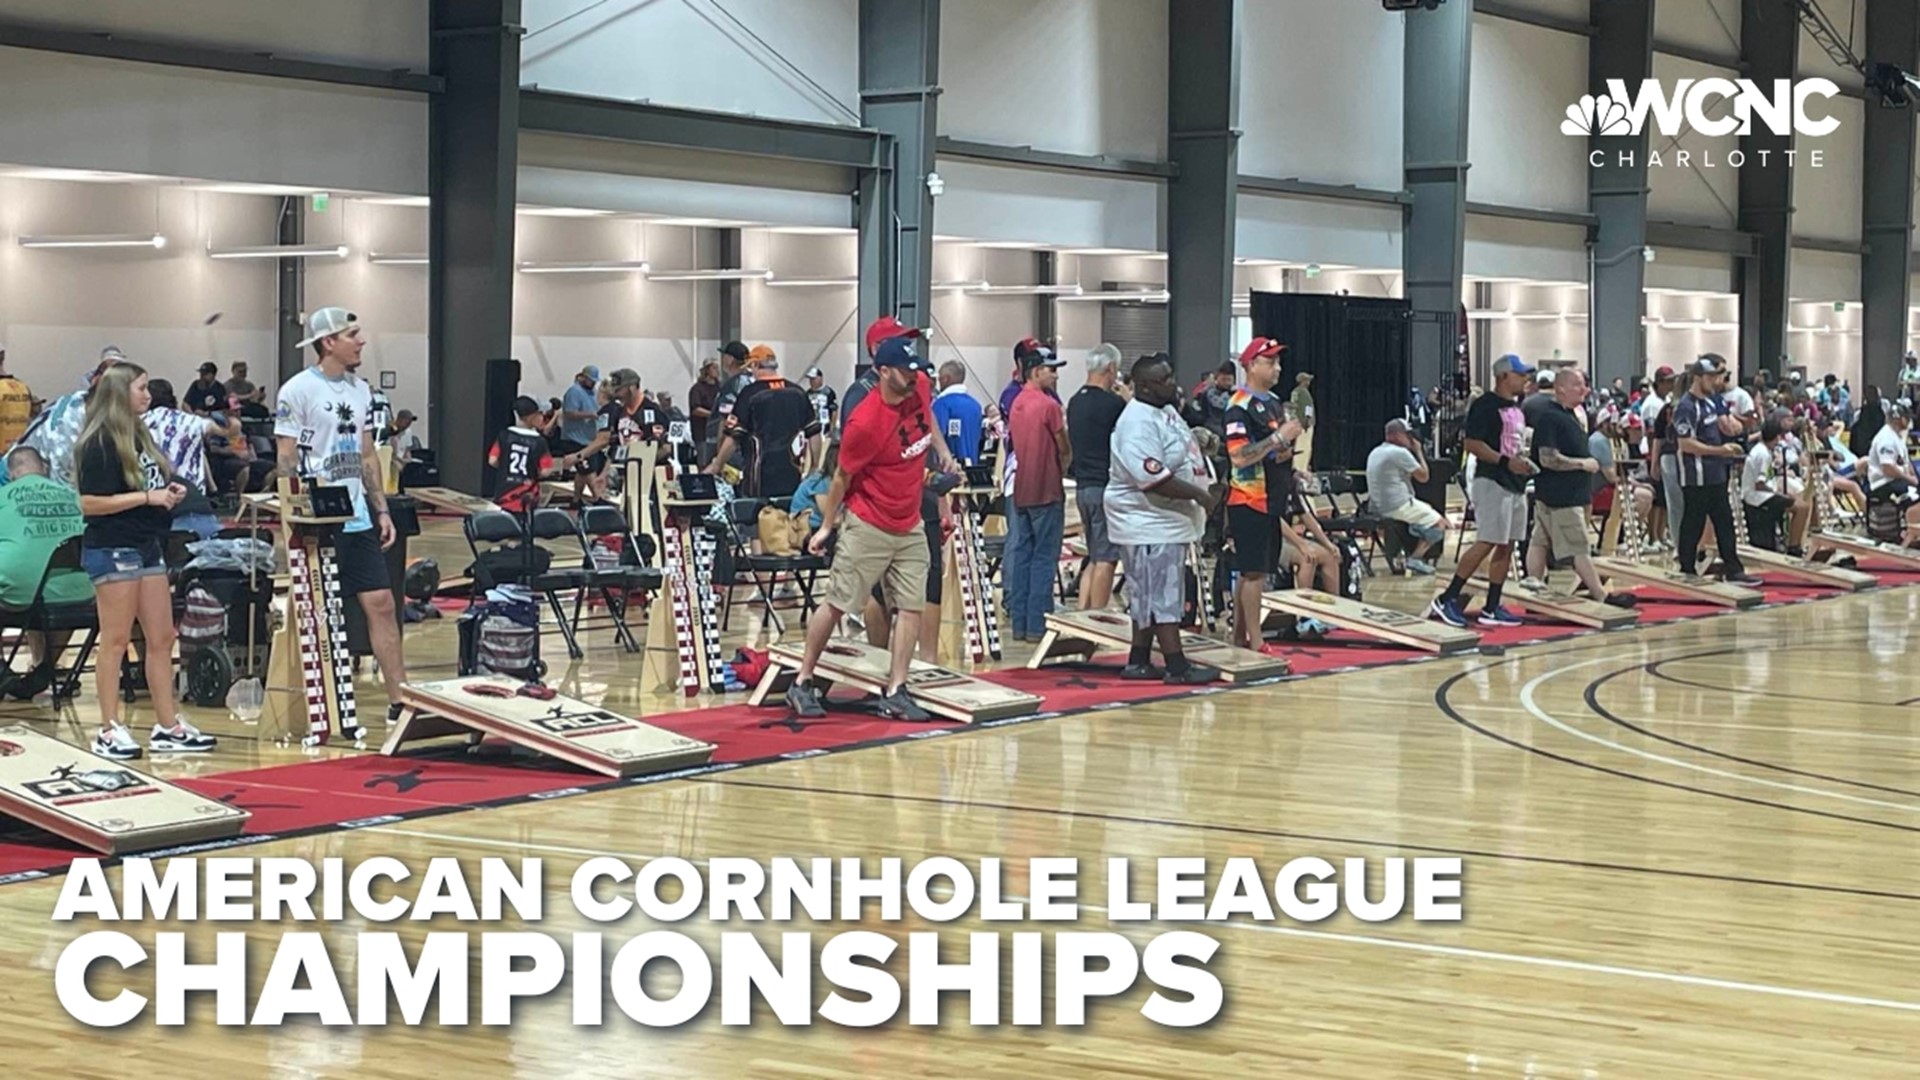 Rock Hill is the heart of professional cornhole this week, and even more events are getting the ESPN spotlight too!